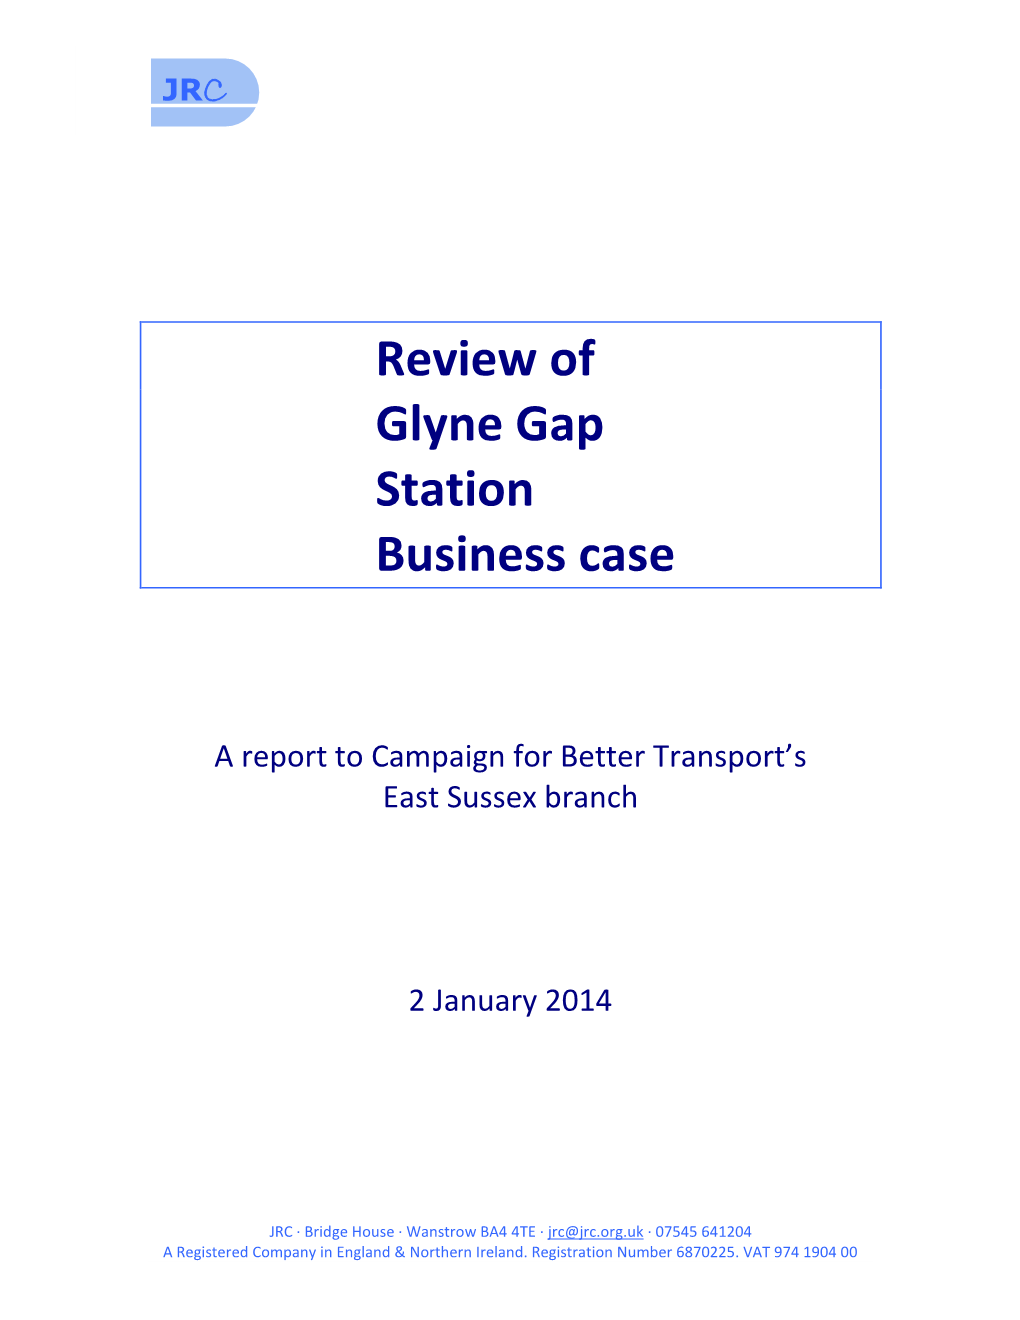 JRC Review of Glyne Gap Station Business Case